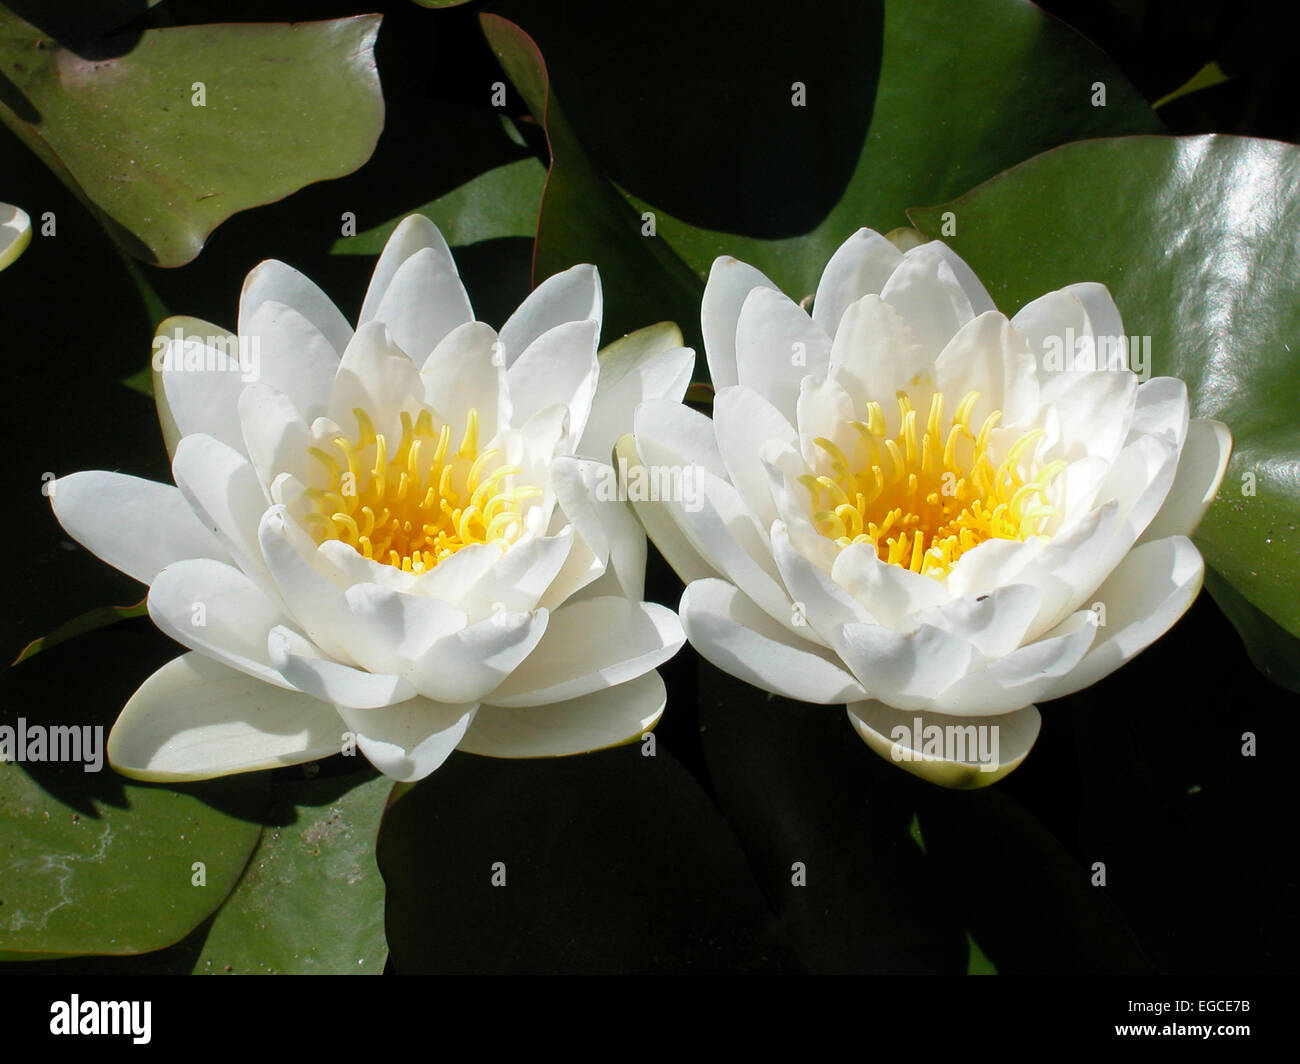 The water lilly belongs to the 'nymphaeaceae' family of flowering plants. Many members of this family are commonly called water Stock Photo